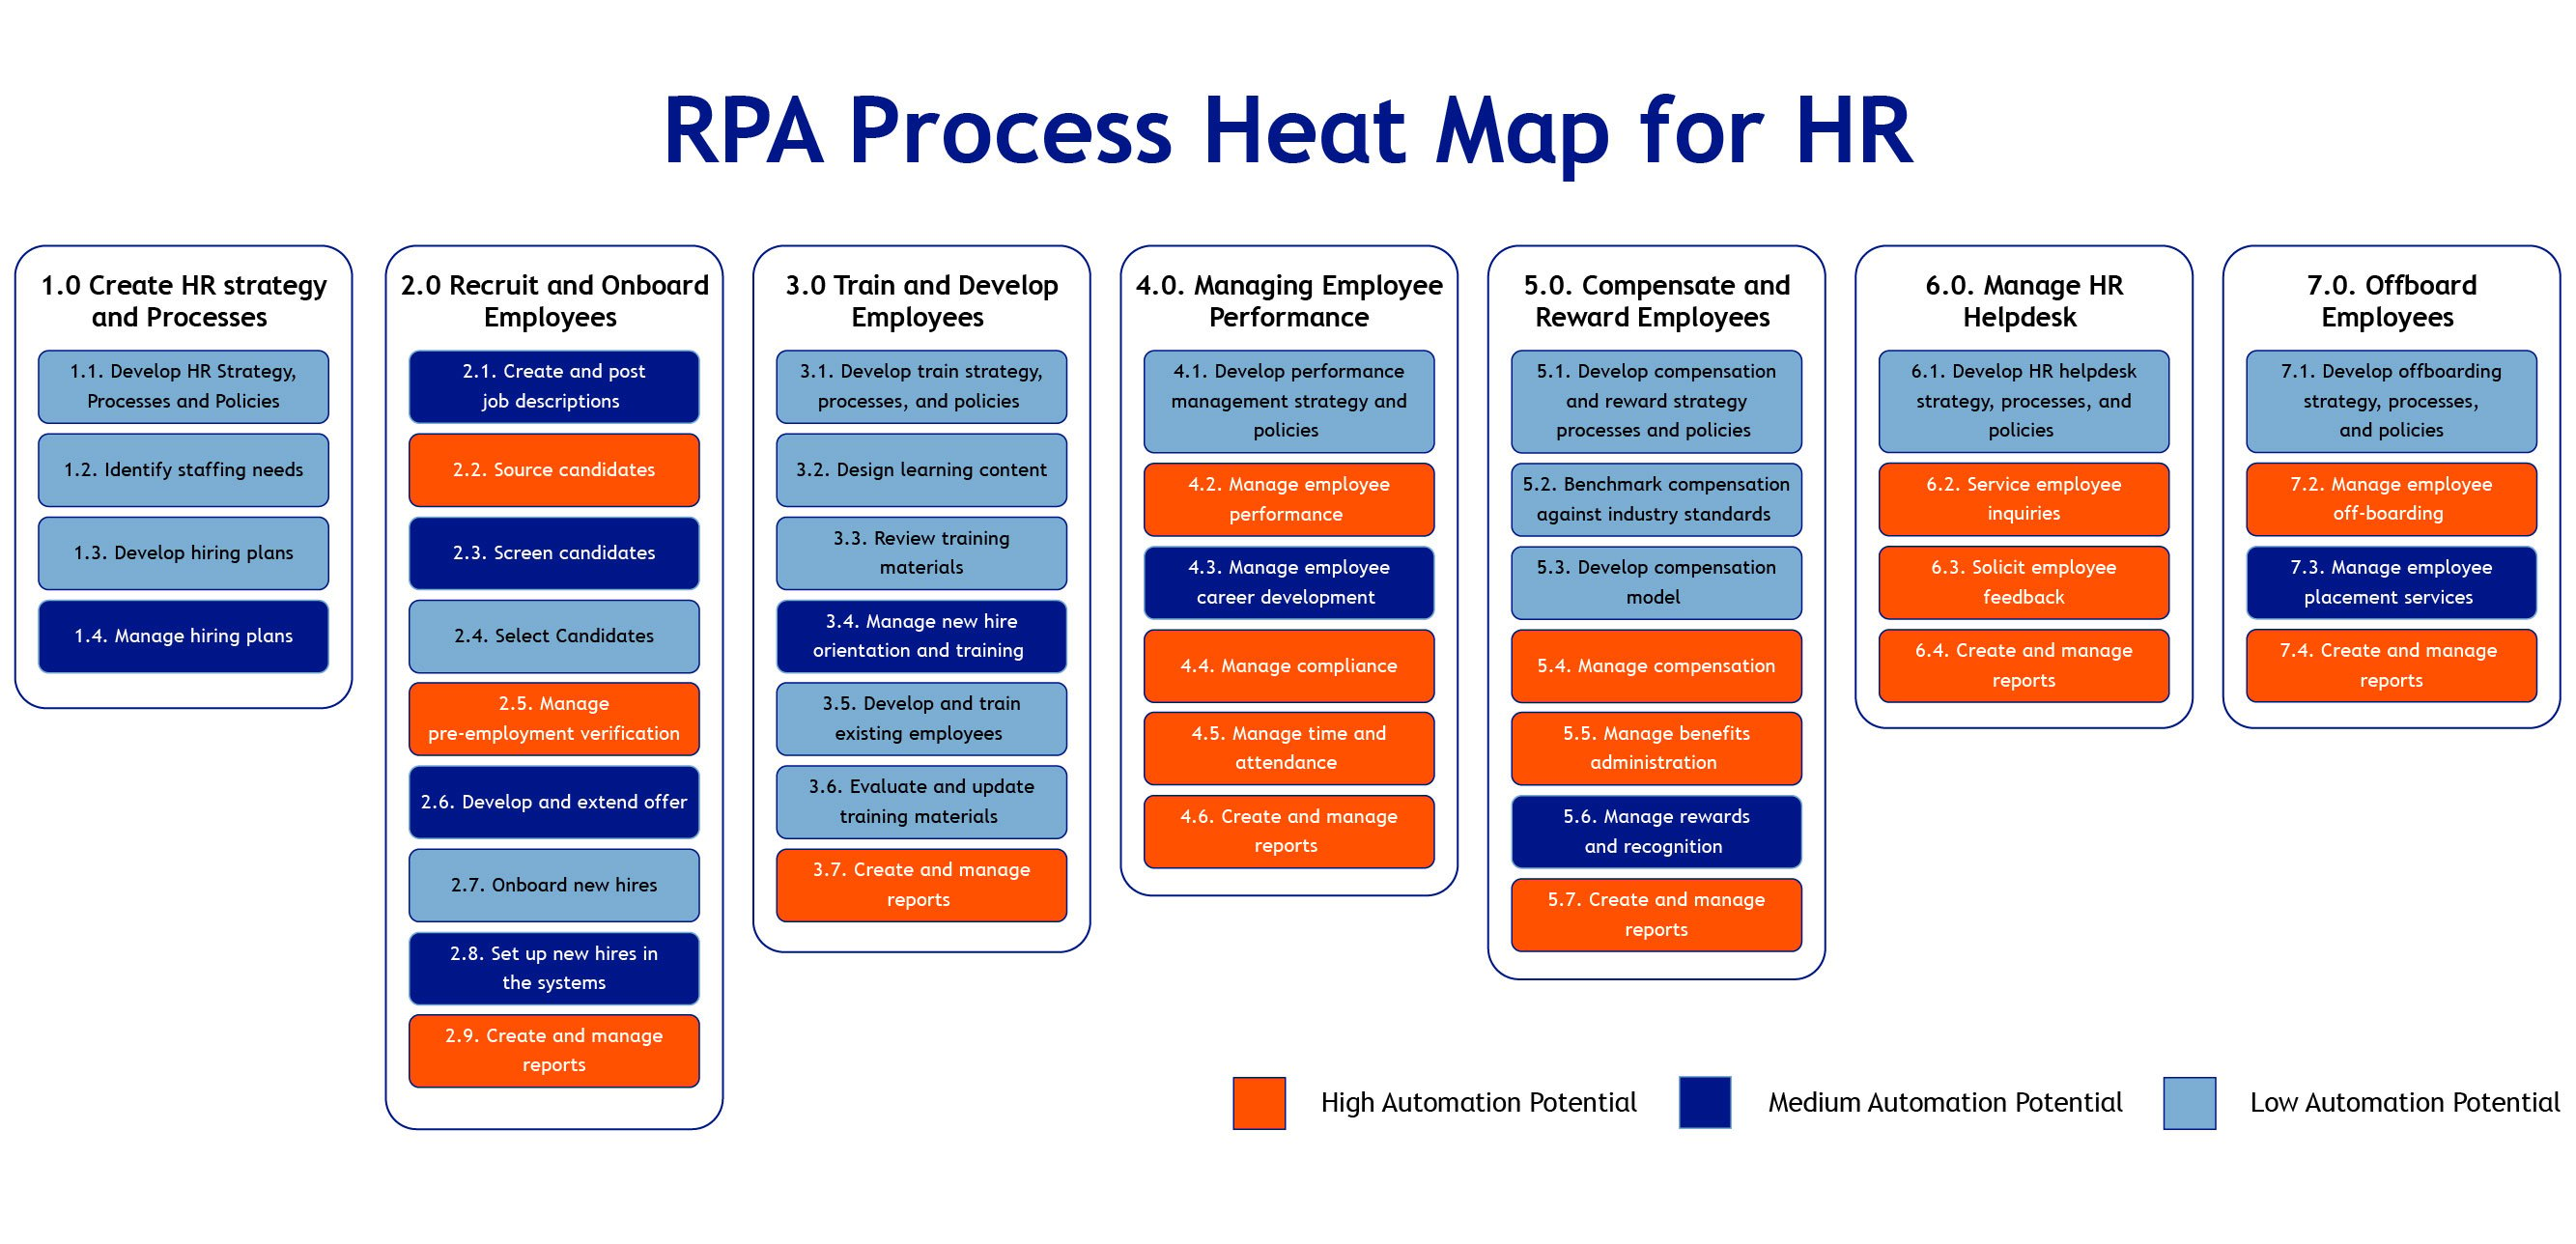 RPA Process Heat Map for HR